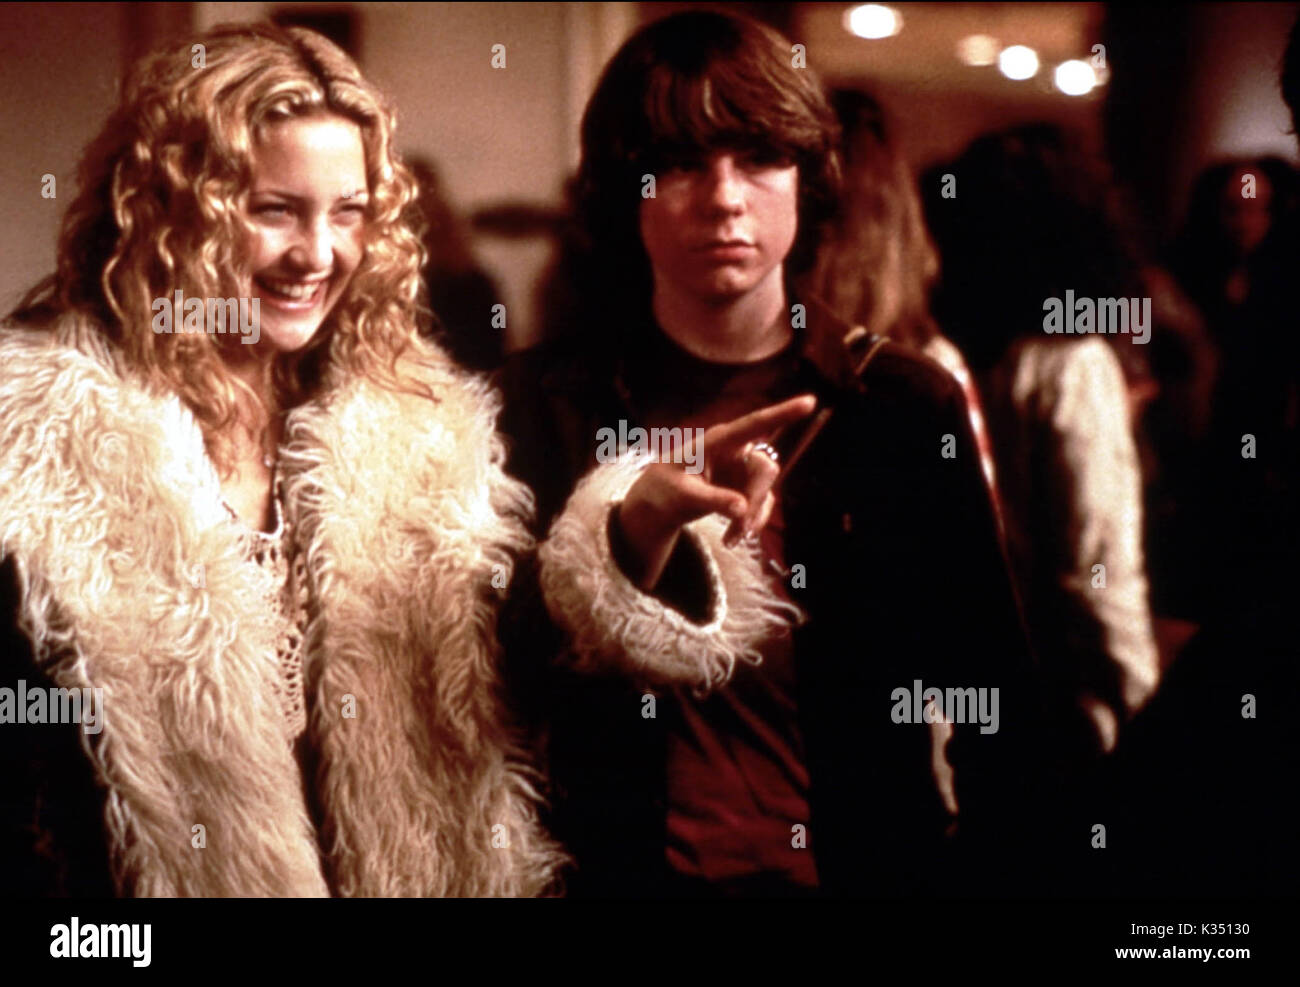 ALMOST FAMOUS KATE HUDSON, PATRICK FUGIT     Date: 1999 Stock Photo